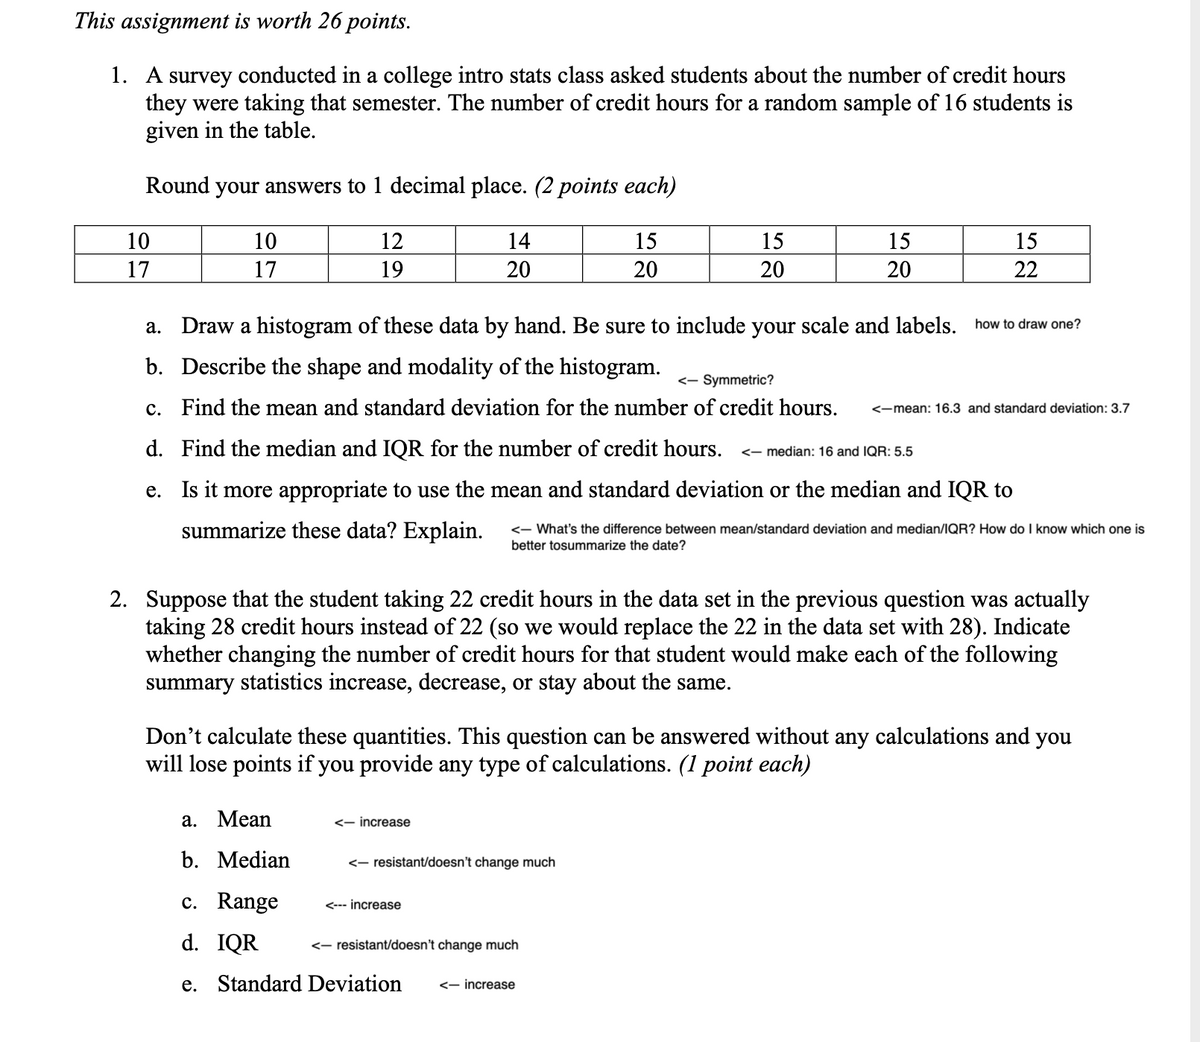 This assignment is worth 26 points.
1. A survey conducted in a college intro stats class asked students about the number of credit hours
they were taking that semester. The number of credit hours for a random sample of 16 students is
given in the table.
Round your answers to 1 decimal place. (2 points each)
10
10
12
14
15
15
15
15
17
17
19
20
20
20
20
22
a. Draw a histogram of these data by hand. Be sure to include your scale and labels. how to draw one?
b. Describe the shape and modality of the histogram.
<- Symmetric?
c. Find the mean and standard deviation for the number of credit hours.
<-mean: 16.3 and standard deviation: 3.7
d. Find the median and IQR for the number of credit hours.
<- median: 16 and IQR: 5.5
e. Is it more appropriate to use the mean and standard deviation or the median and IQR to
summarize these data? Explain.
<- What's the difference between mean/standard deviation and median/IQR? How do I know which one is
better tosummarize the date?
2. Suppose that the student taking 22 credit hours in the data set in the previous question was actually
taking 28 credit hours instead of 22 (so we would replace the 22 in the data set with 28). Indicate
whether changing the number of credit hours for that student would make each of the following
summary statistics increase, decrease, or stay about the same.
Don't calculate these quantities. This question can be answered without any calculations and you
will lose points if you provide any type of calculations. (1 point each)
а. Мean
<- increase
b. Median
<- resistant/doesn't change much
c. Range
d. IQR
<--- increase
<- resistant/doesn't change much
e. Standard Deviation
<- increase
